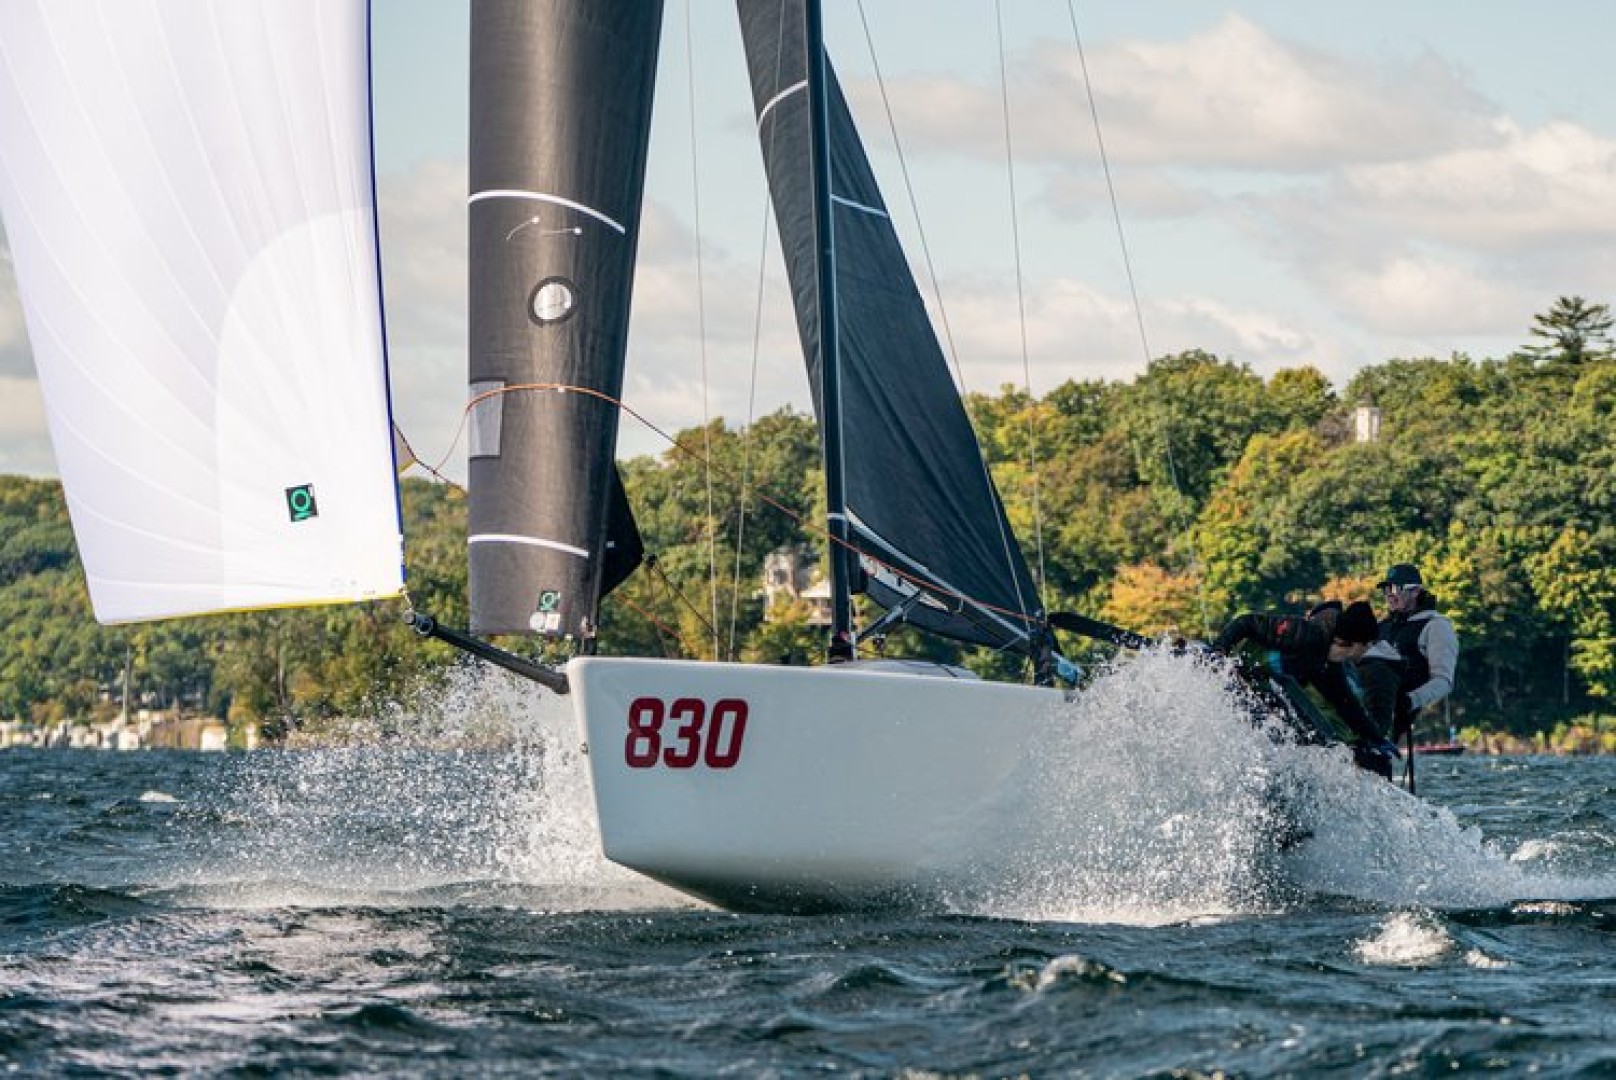 Straightarrow, a supersonic Melges 24 owned by USM24CA Vice President Chelsea Simms and Midwest District Governor George 'Bear' Peet blasts downwind on Lake Geneva in Wisconsin.
Photo by Morgan Kinney, courtesy of Melges Performance Sailboats